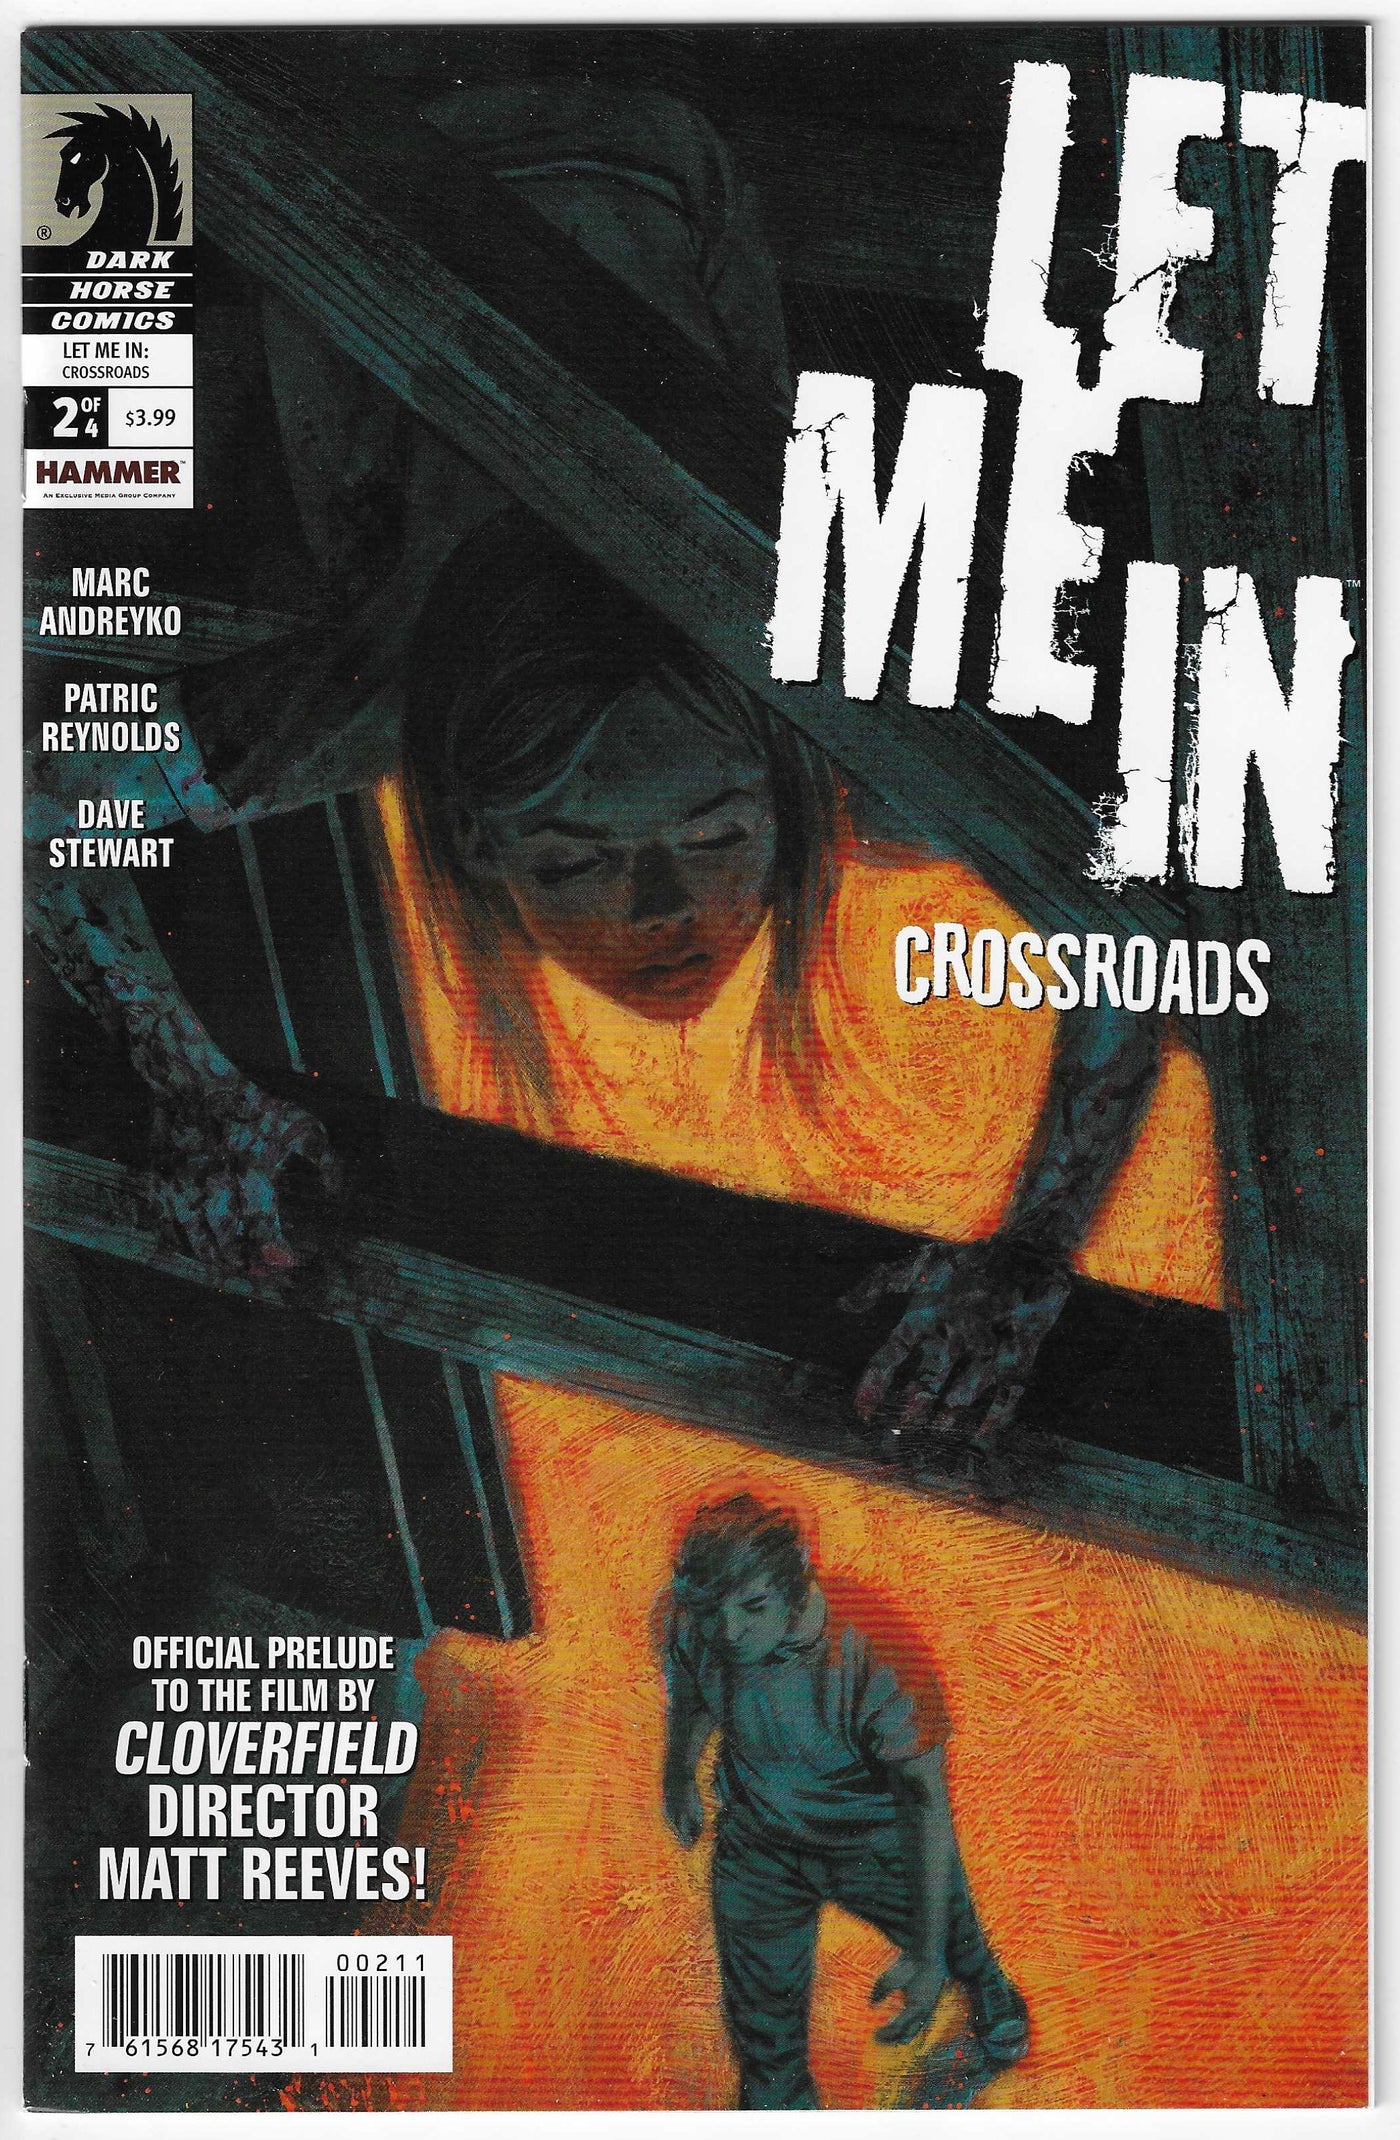 Let Me In: Crossroads (#2 of 4)